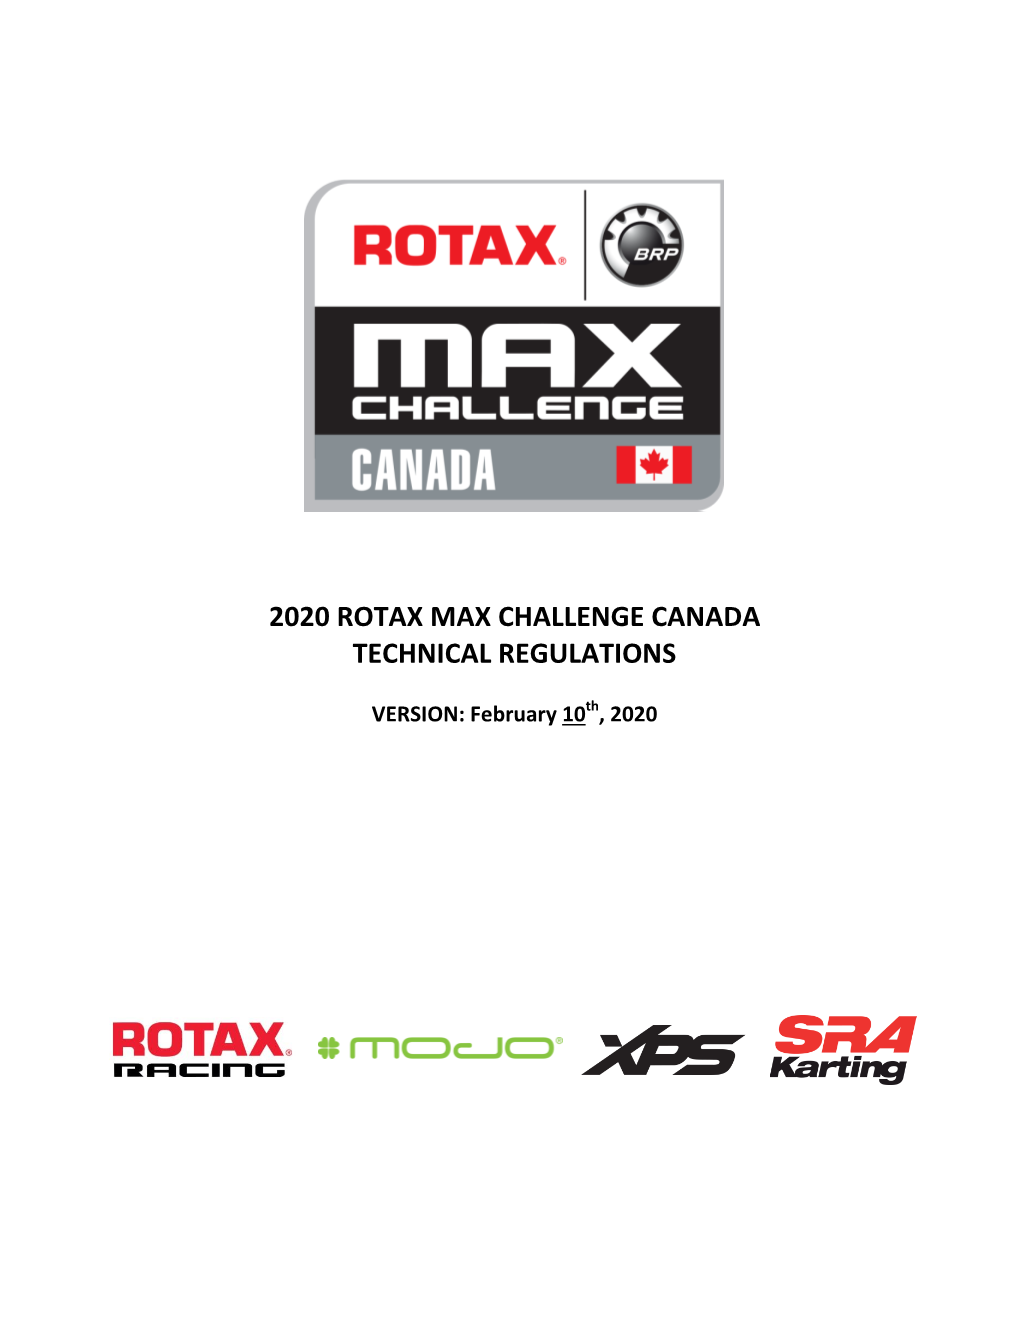 2020 Rotax Max Challenge Canada Technical Regulations